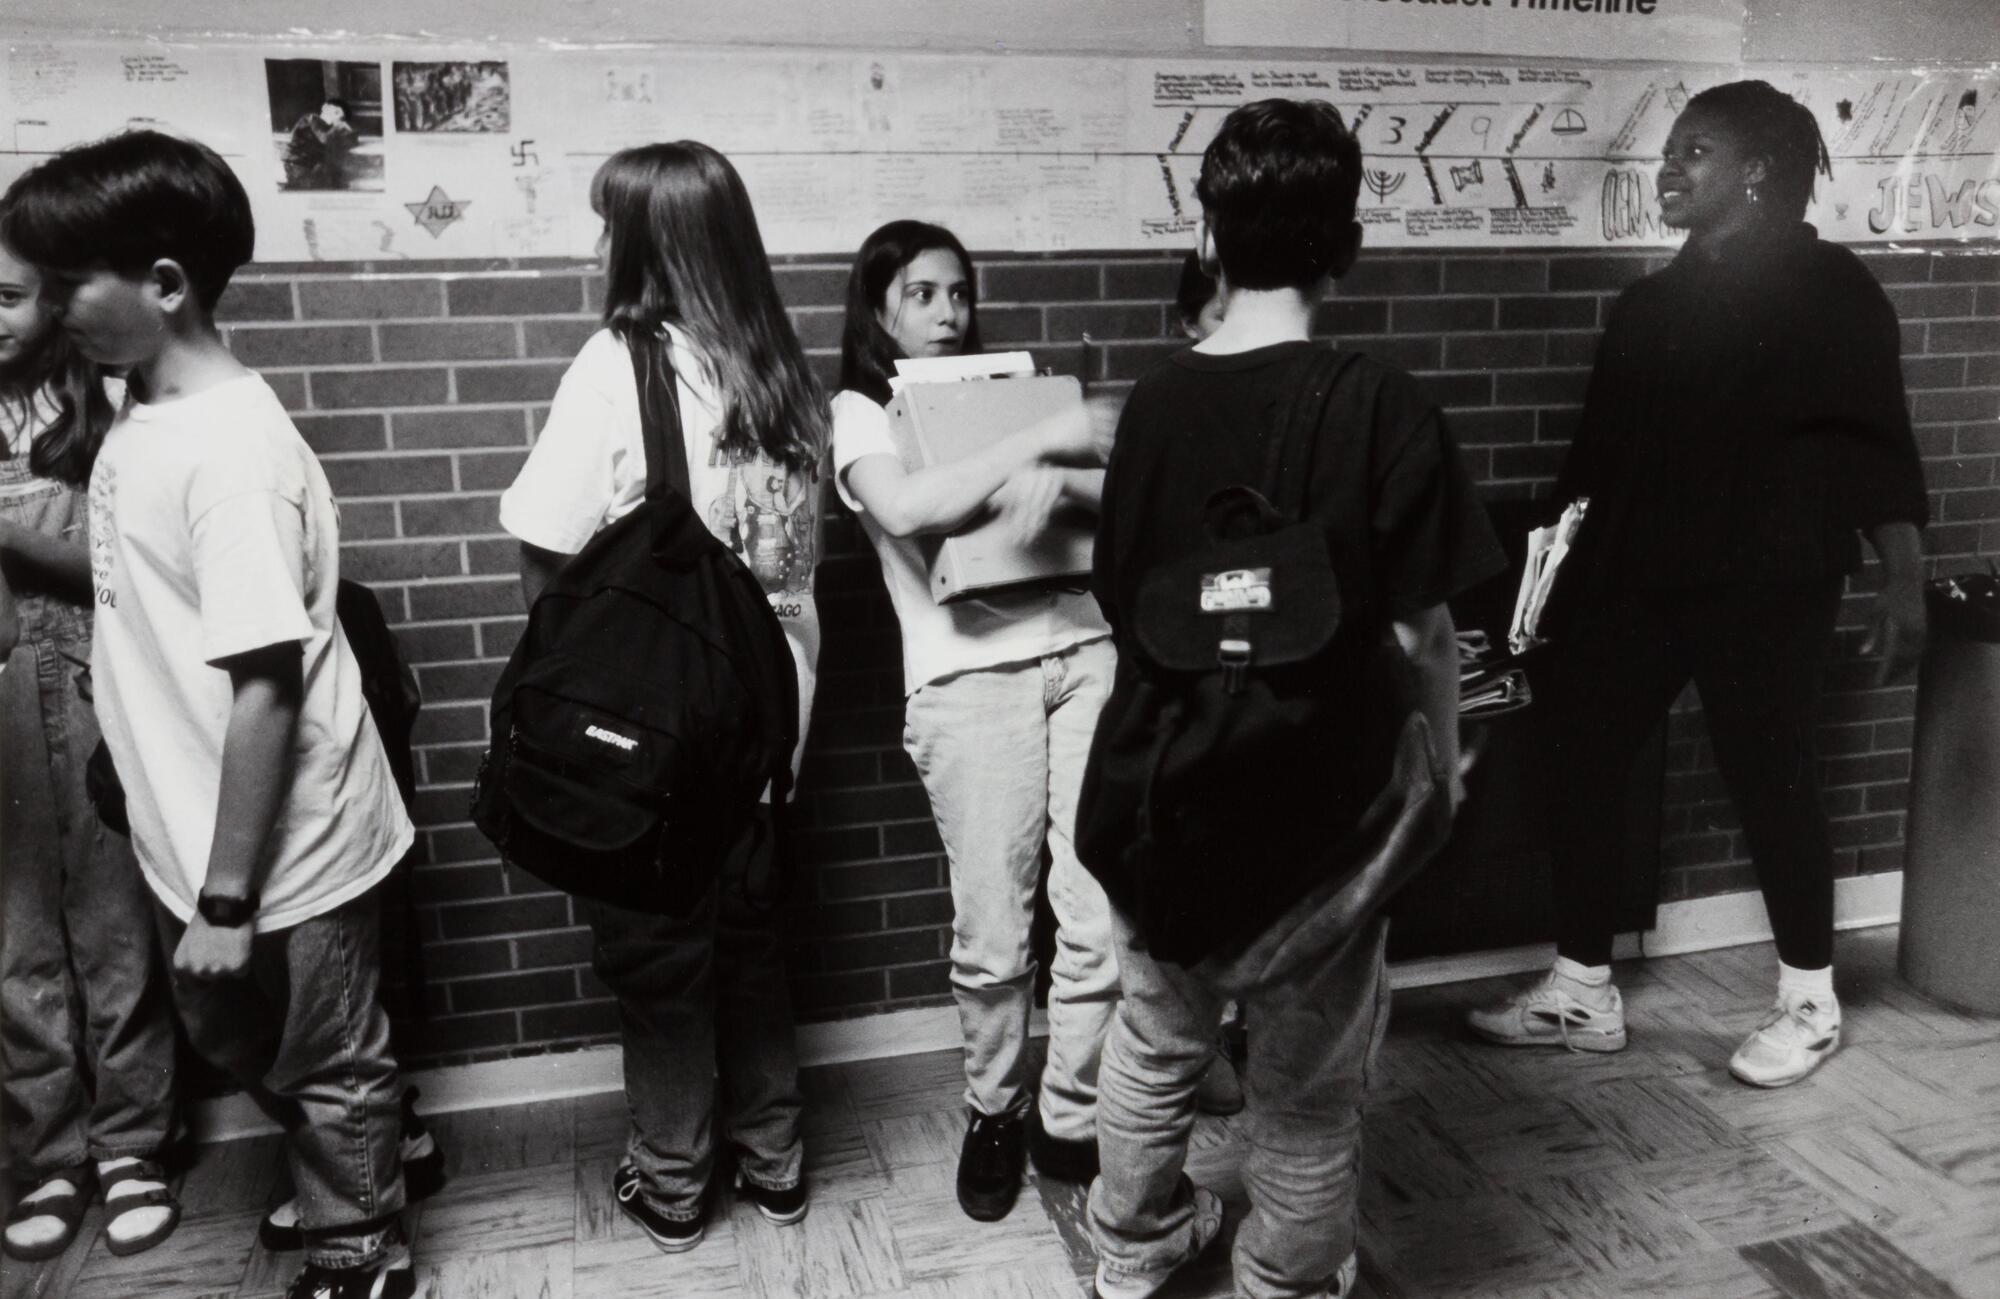 Hallway of a school with children. One girl is leaning on a wall holding large binders, posters on the wall.